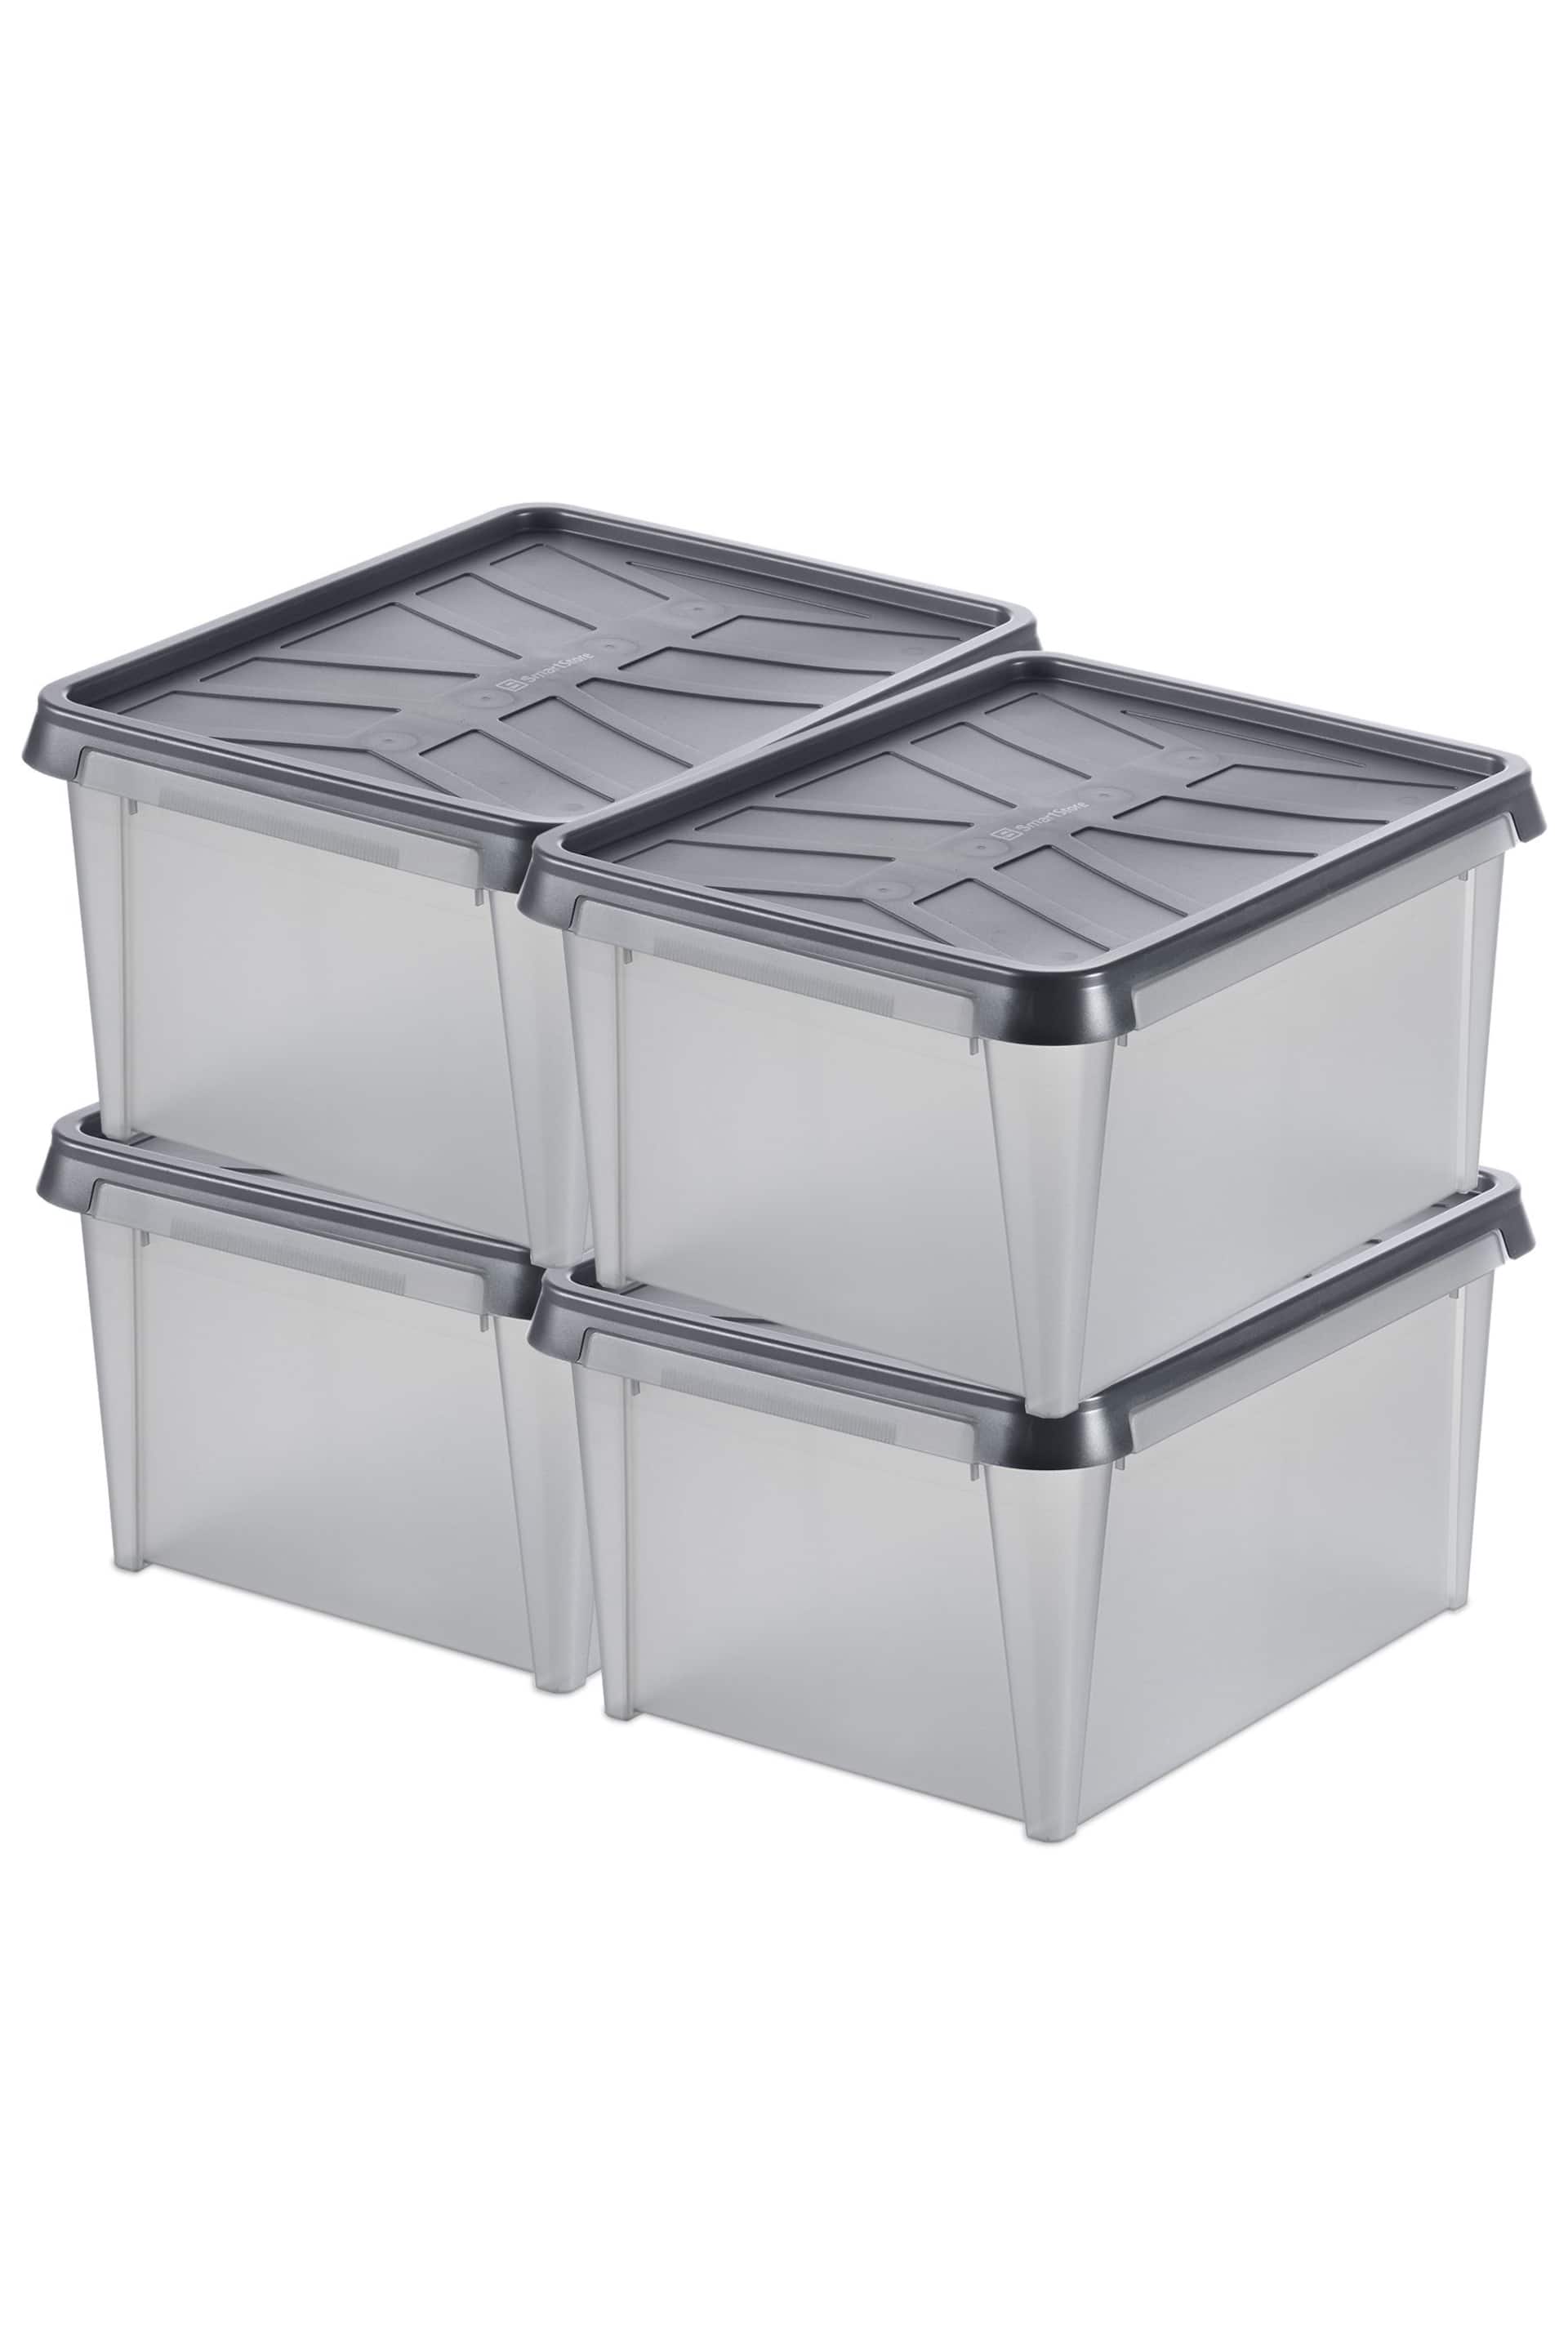 Orthex Set of 4 Grey Smartstore 33L Dry Water Resistant Storage Boxes - Image 5 of 5